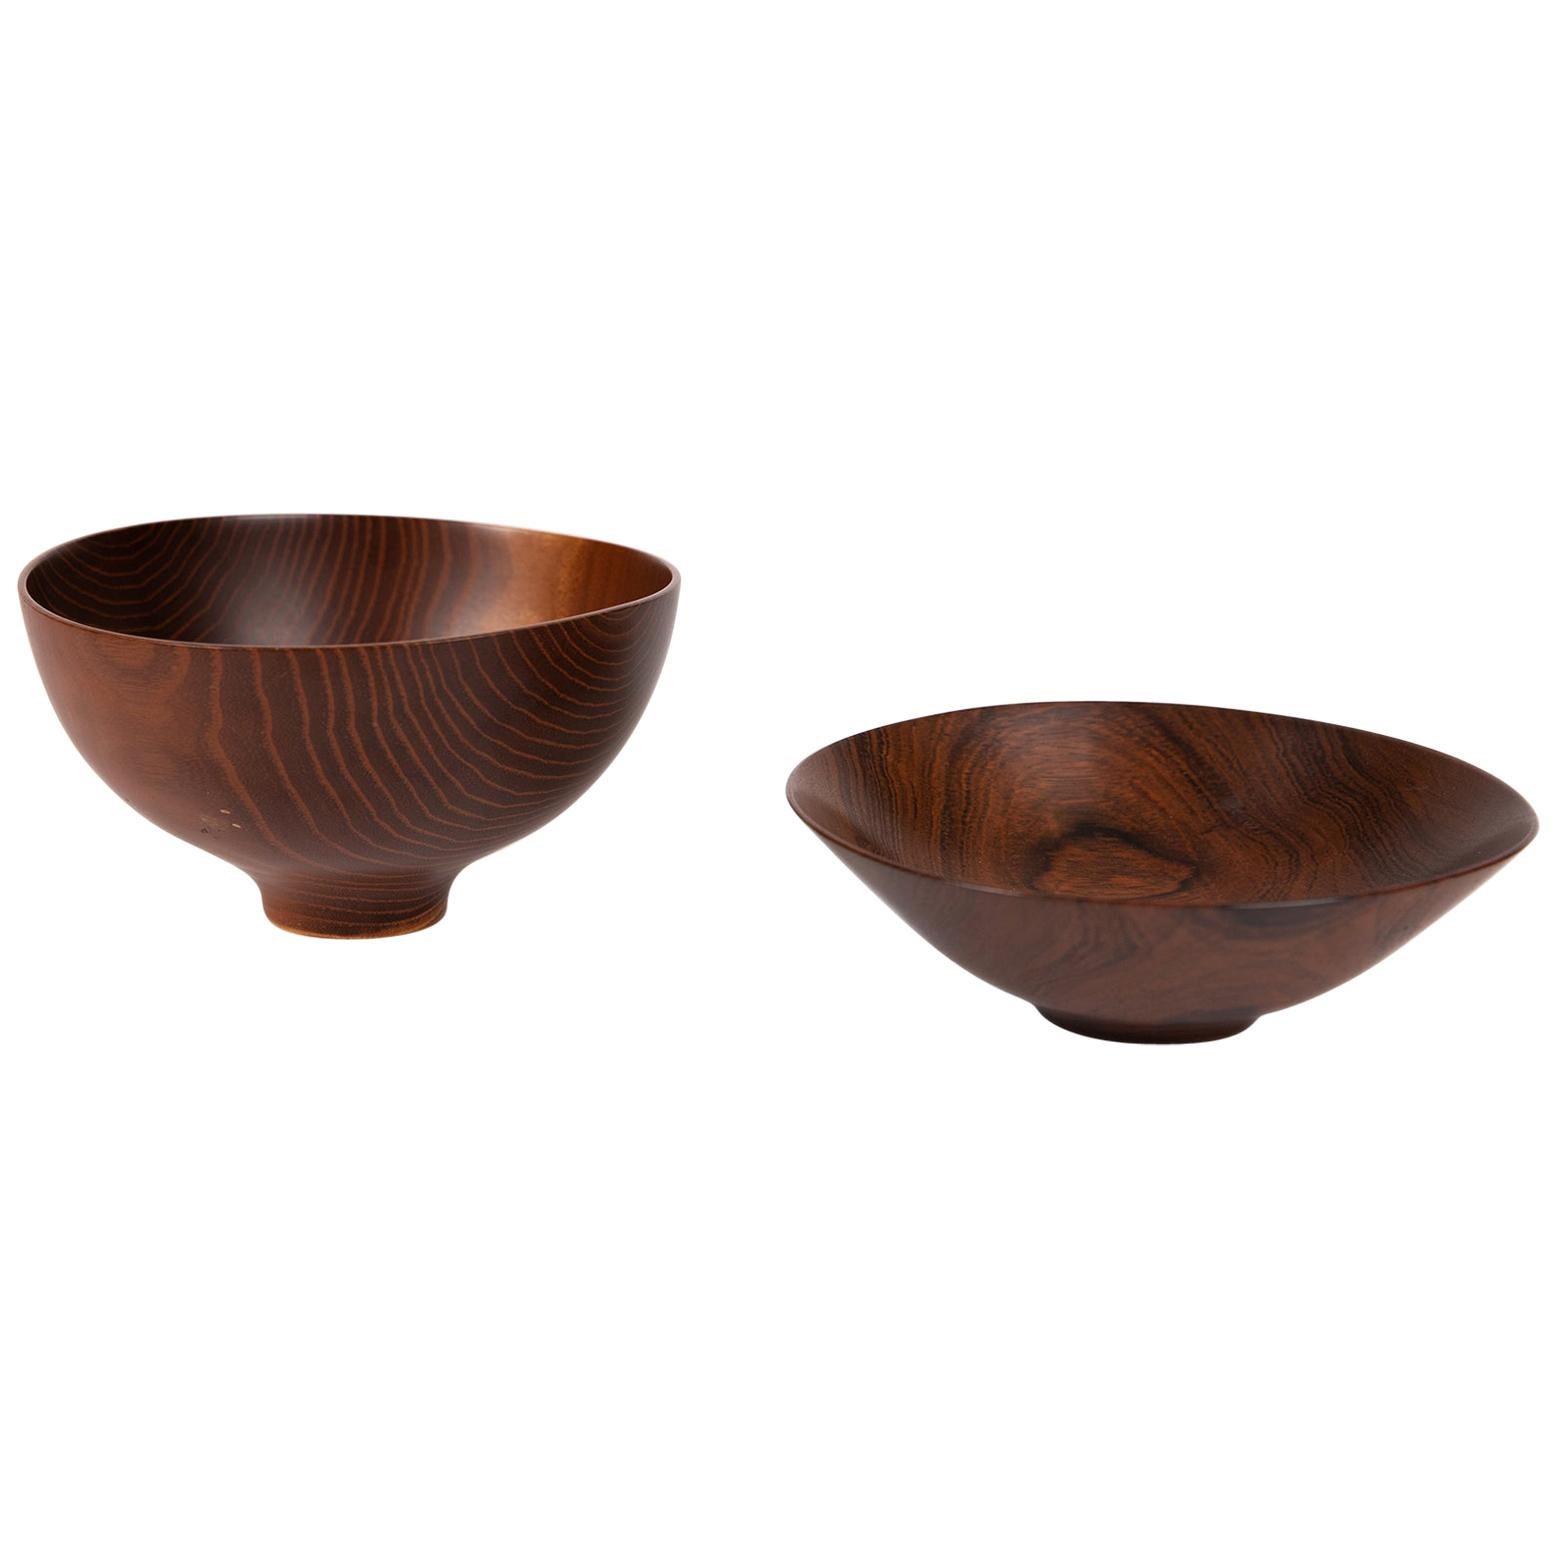 A masterfully turned wood bowl by Bob Stocksdale. The small bowl example is turned in Brazilian rosewood. It measures 2